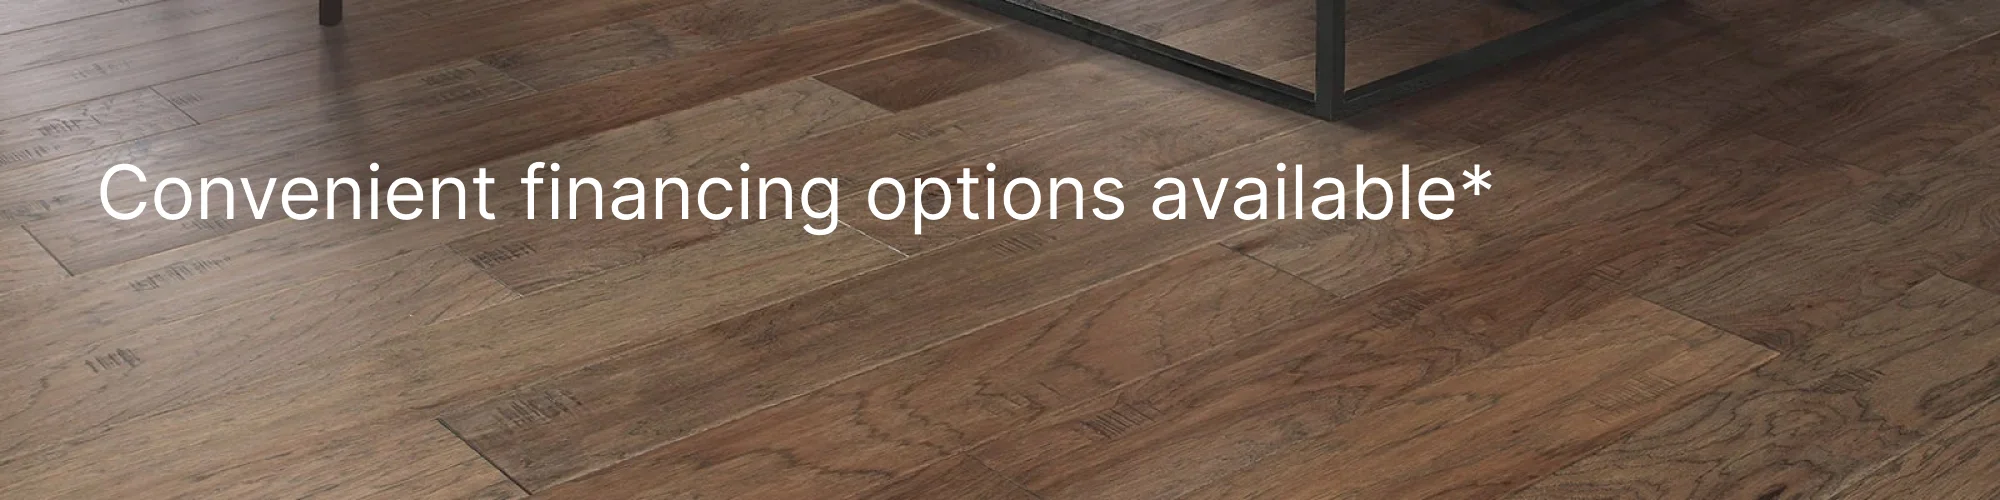 Flooring financing options available with Chisum's Floor Covering in Ojai, CA